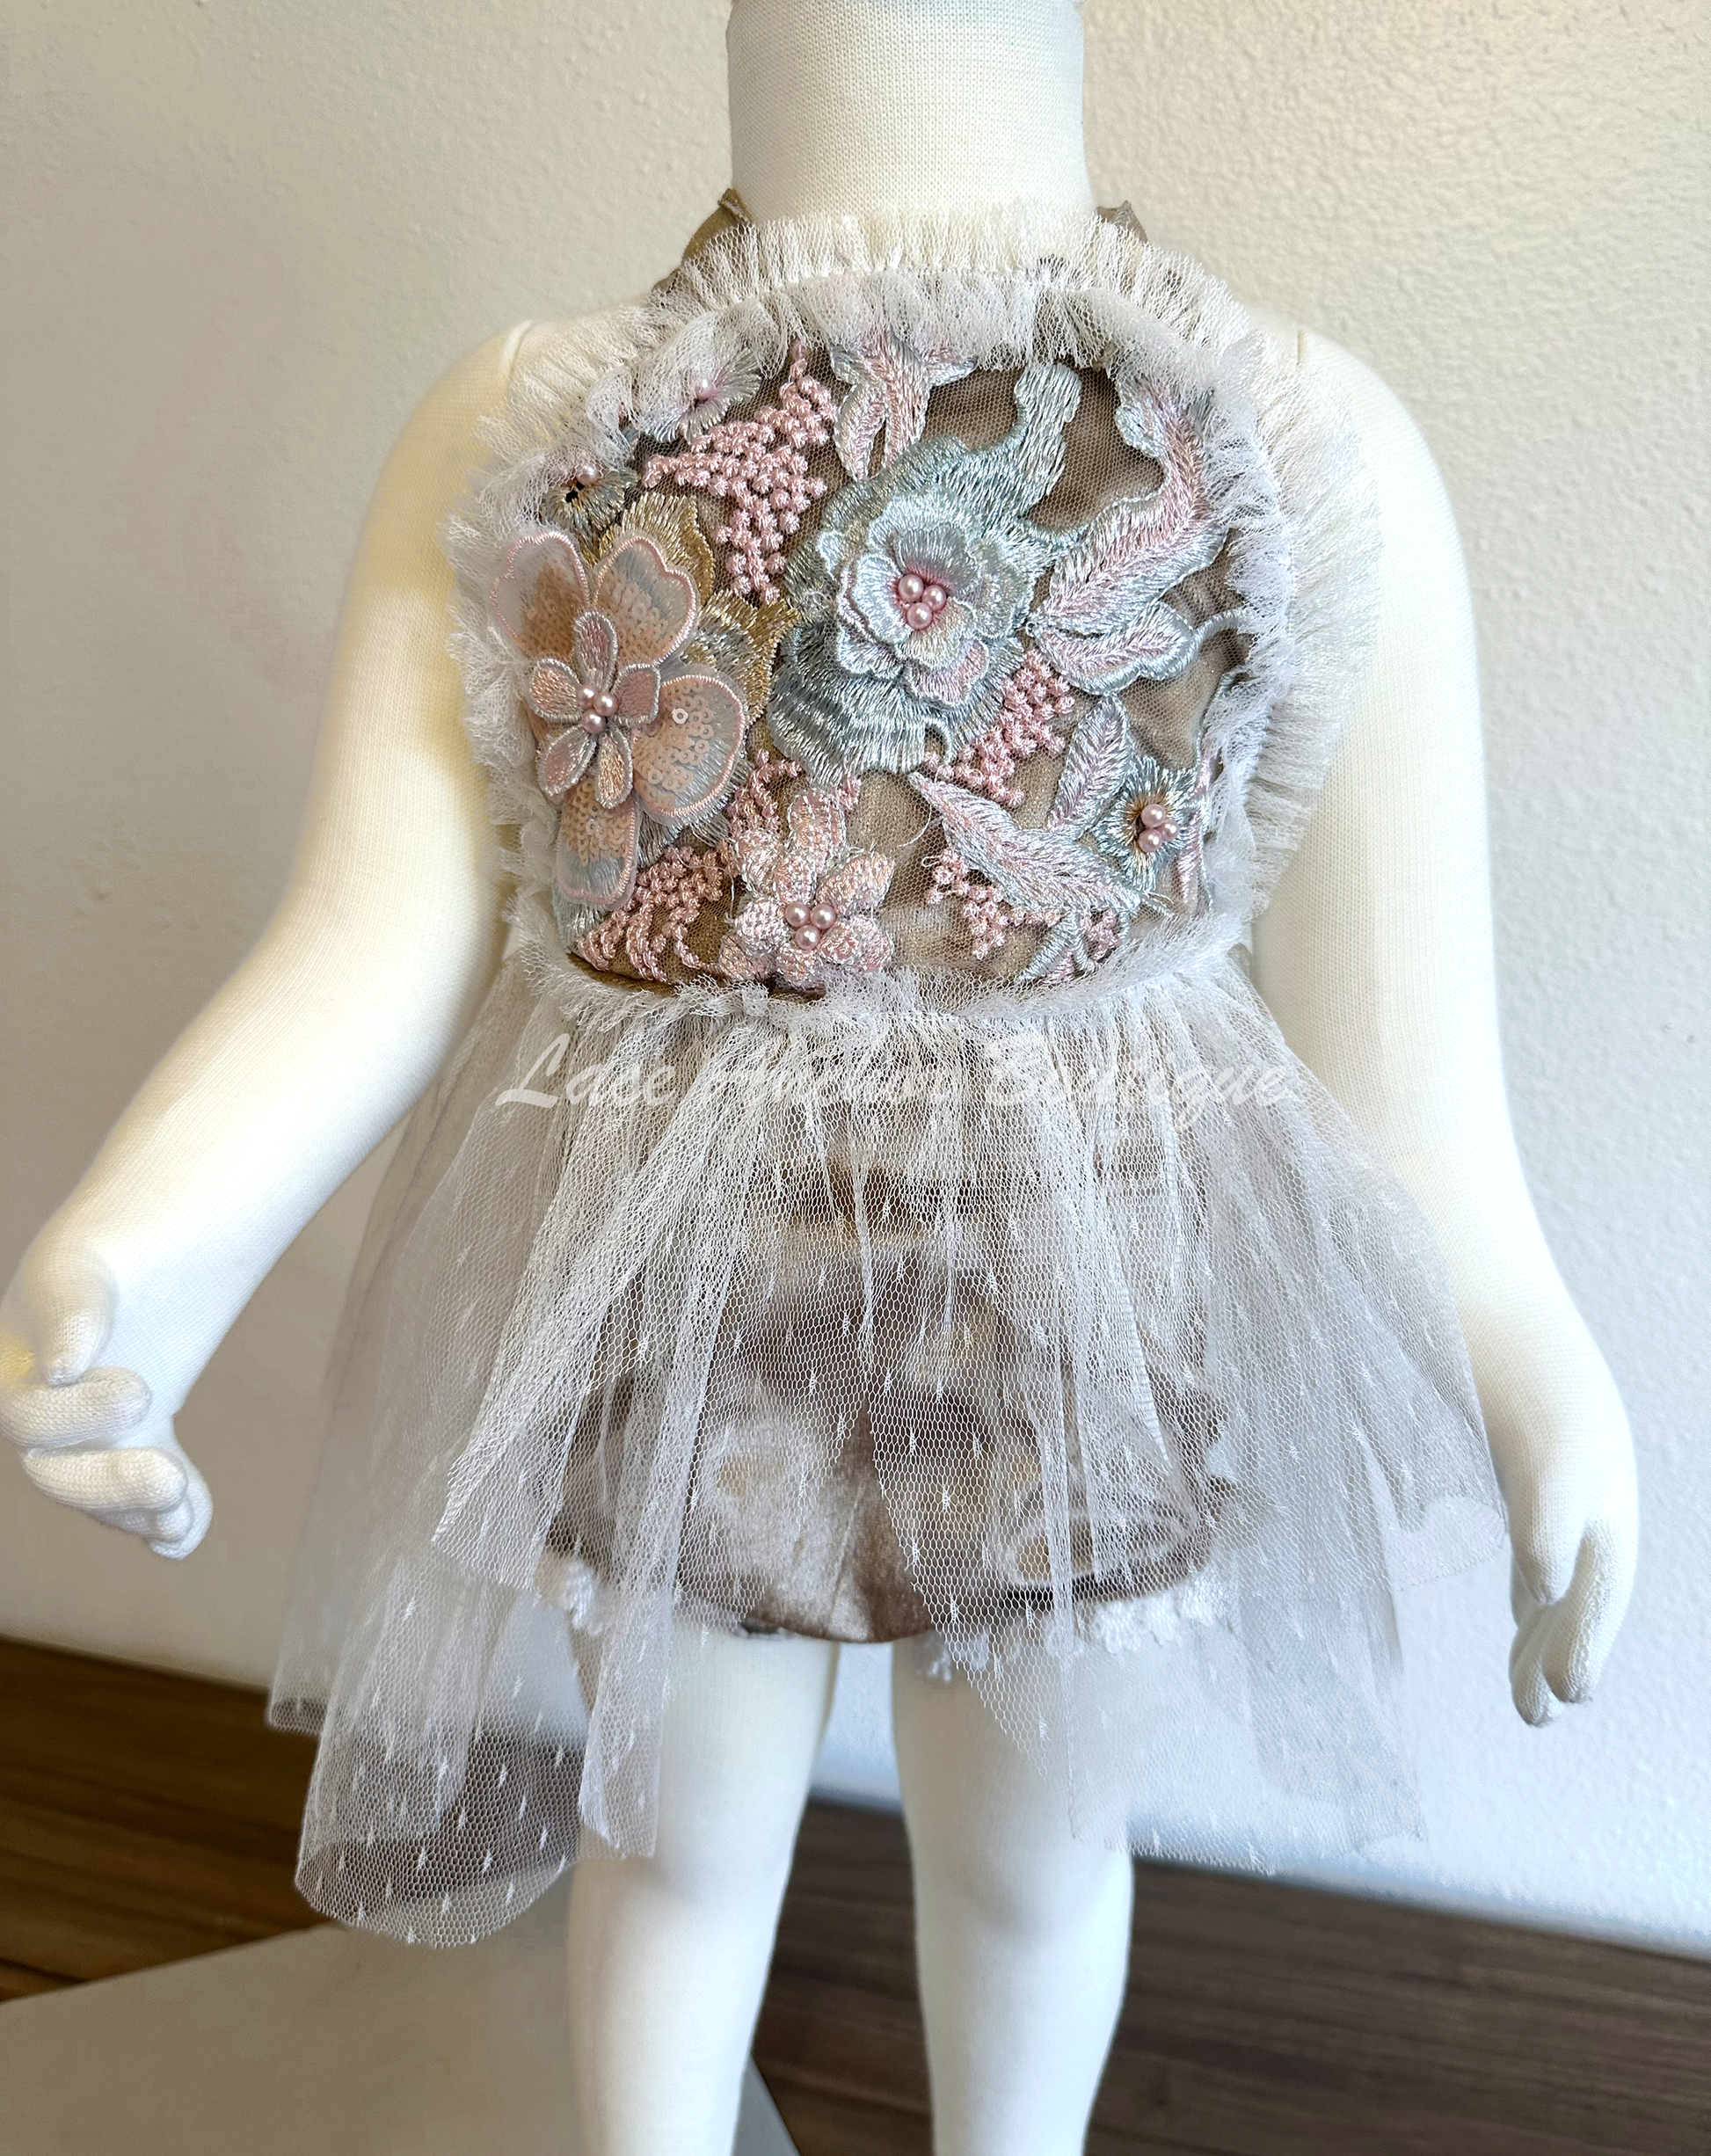 baby girls aupe light brown romper with lace trim, ruffled detail, tulle skirt, and embroidered floral flower top with tied halter straps. Baby girl flower girl outfit.